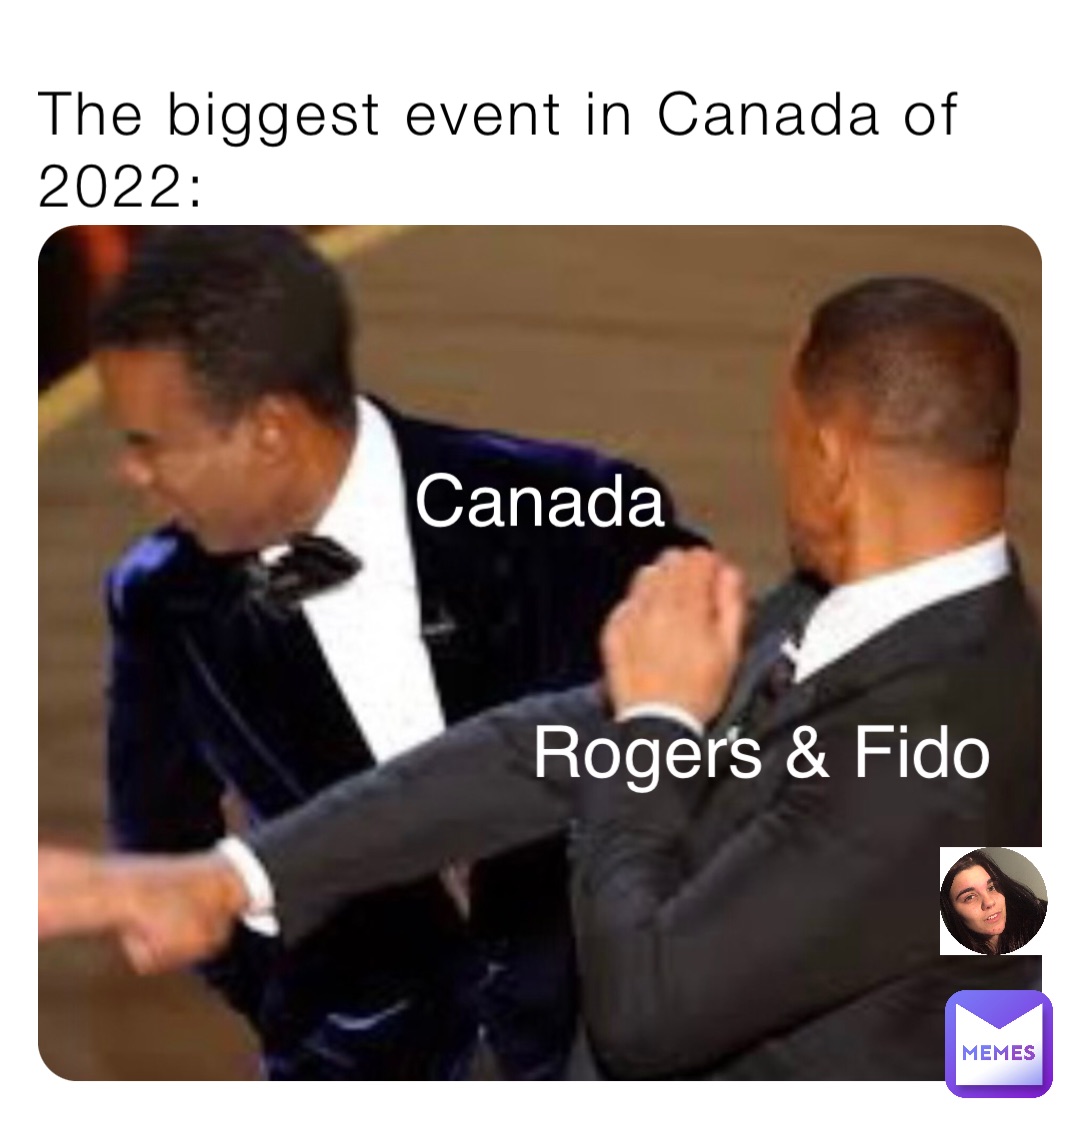 The biggest event in Canada of 2022: Rogers & Fido Canada